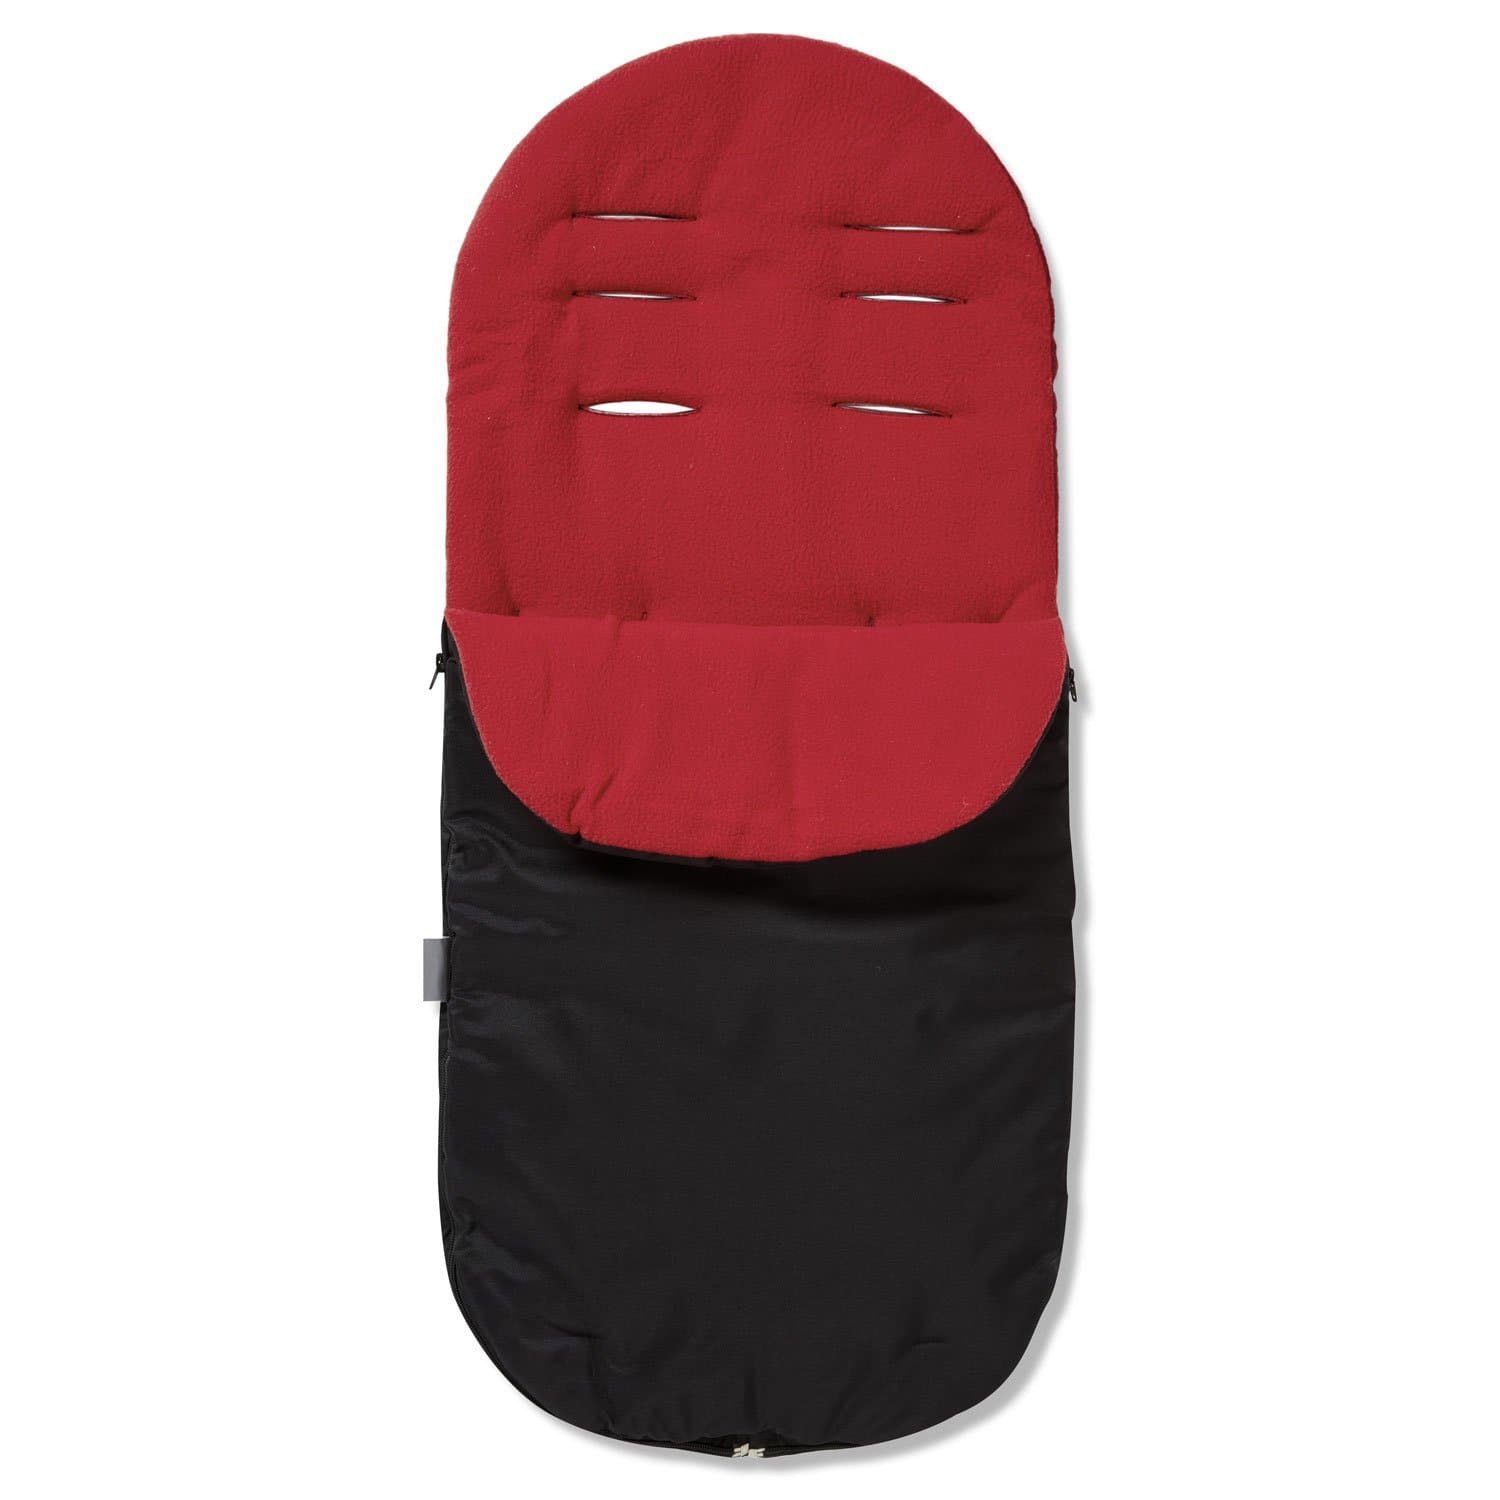 Footmuff / Cosy Toes Compatible with Seed - Red / Fits All Models | For Your Little One